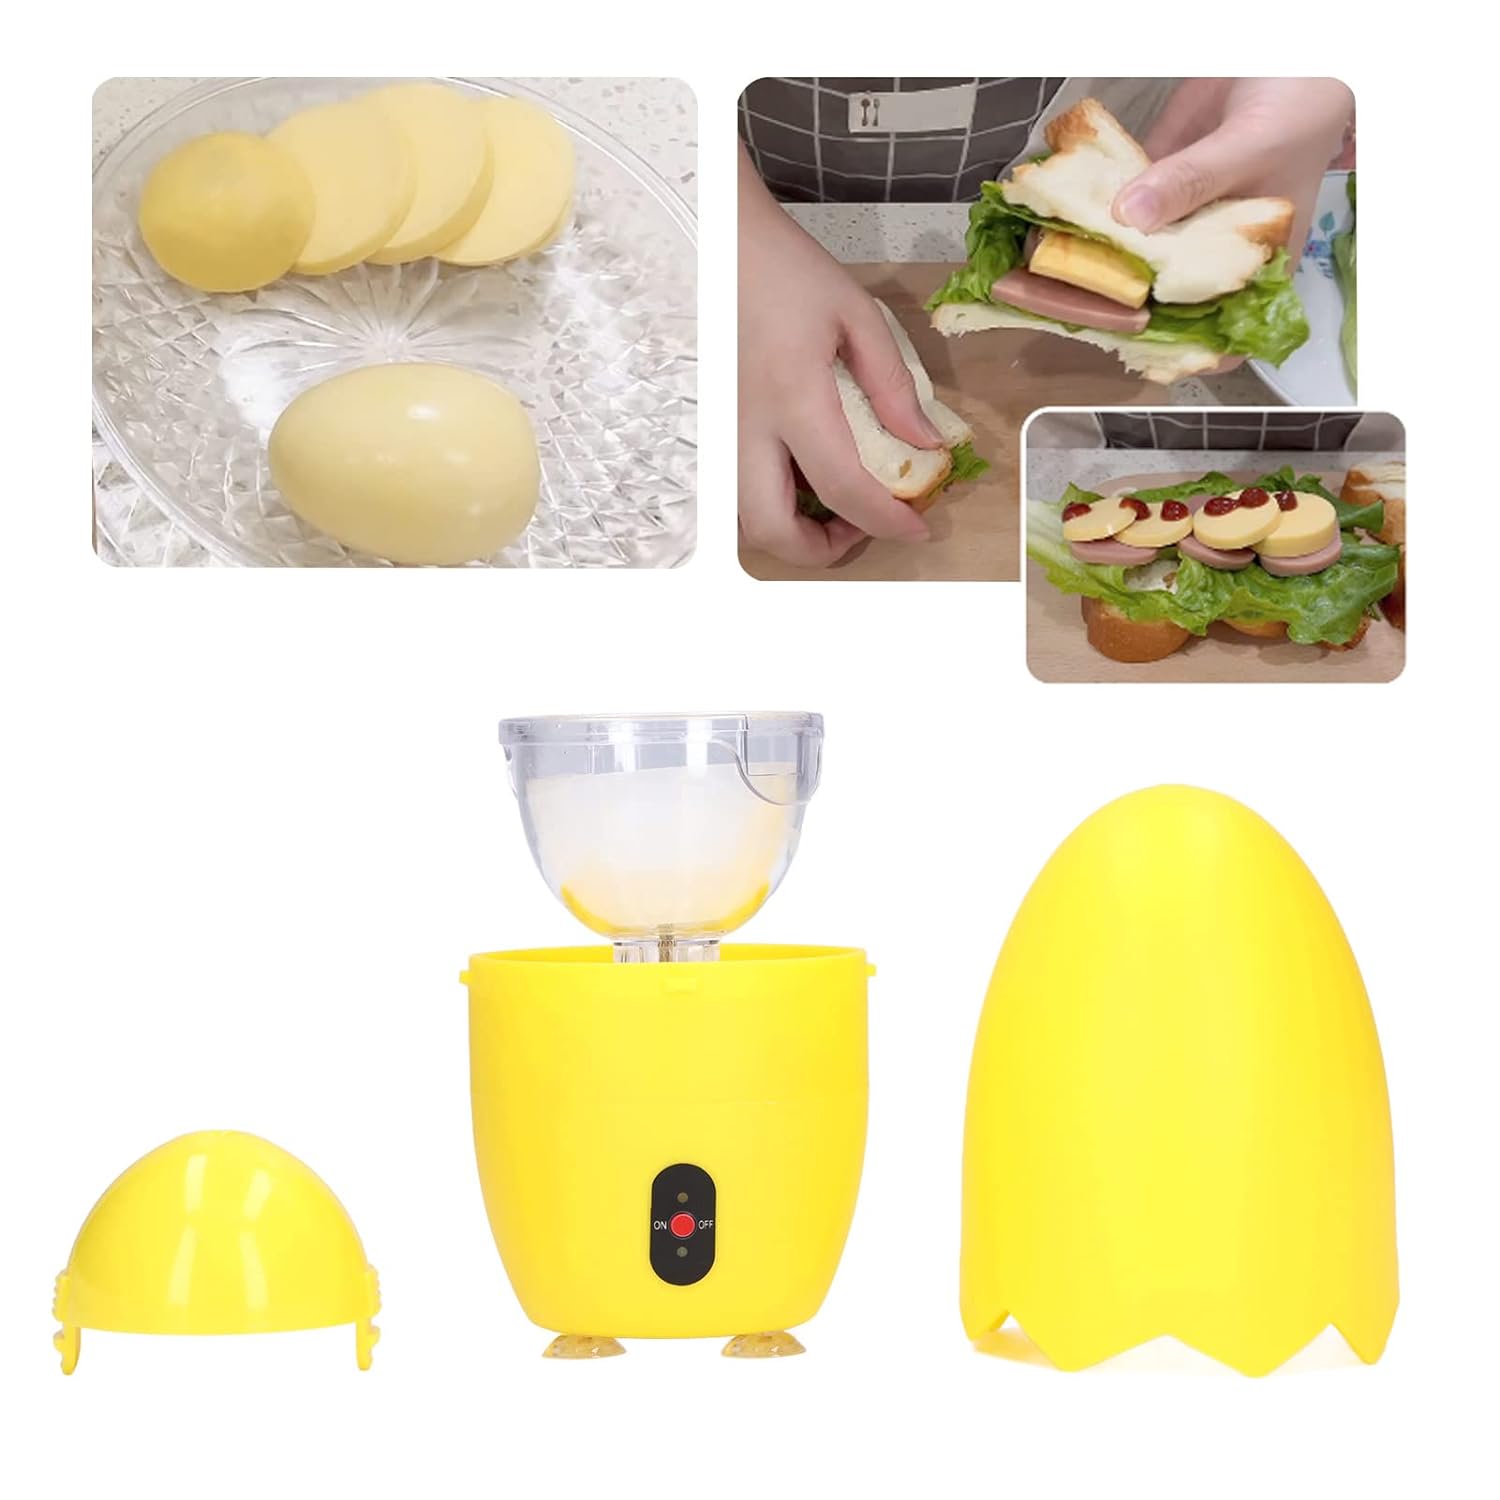 GCP Products Egg Scrambler, 50S Rotation Electric Egg Shakers Spin Mixer  Golden Egg Maker Eggs Cooking